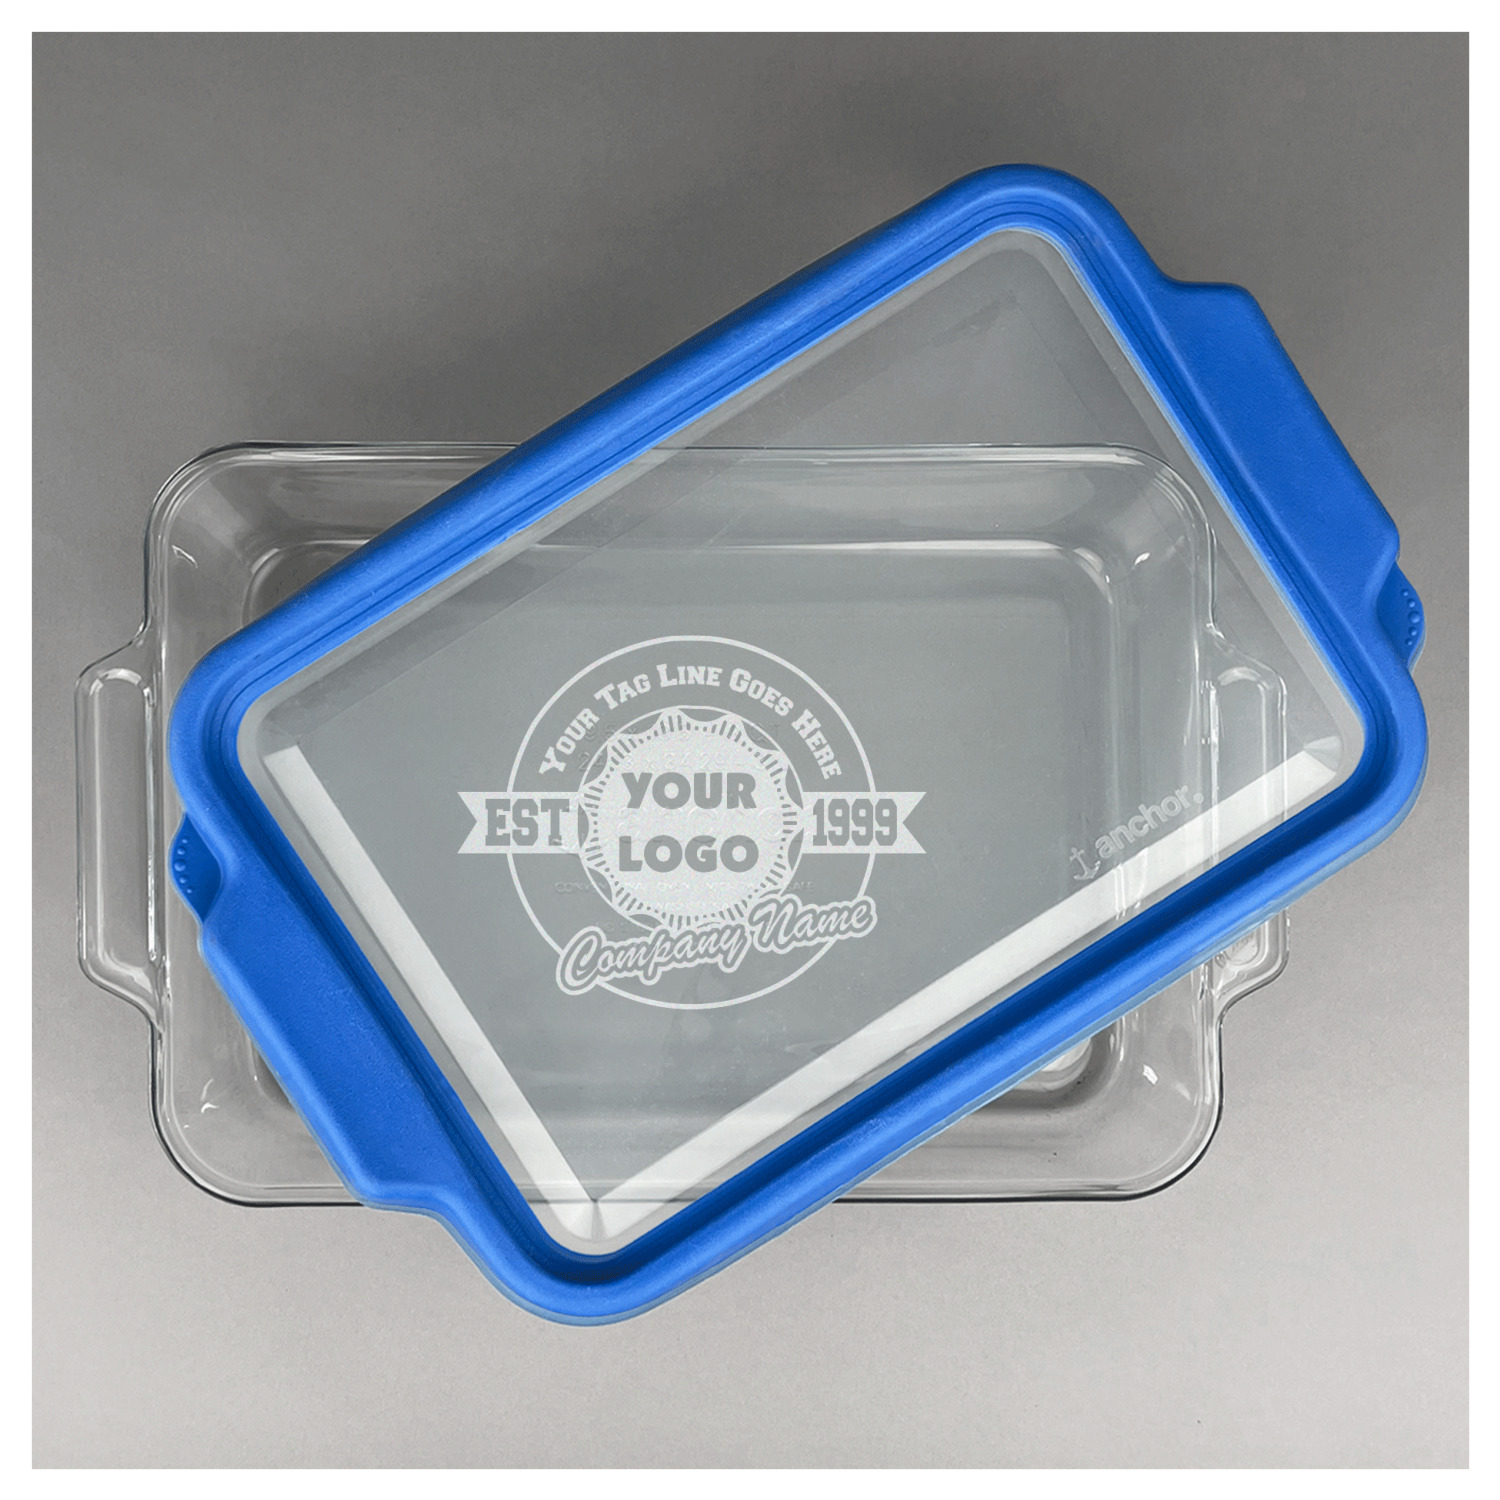 Custom Glass Baking and Cake Dishes, Design & Preview Online